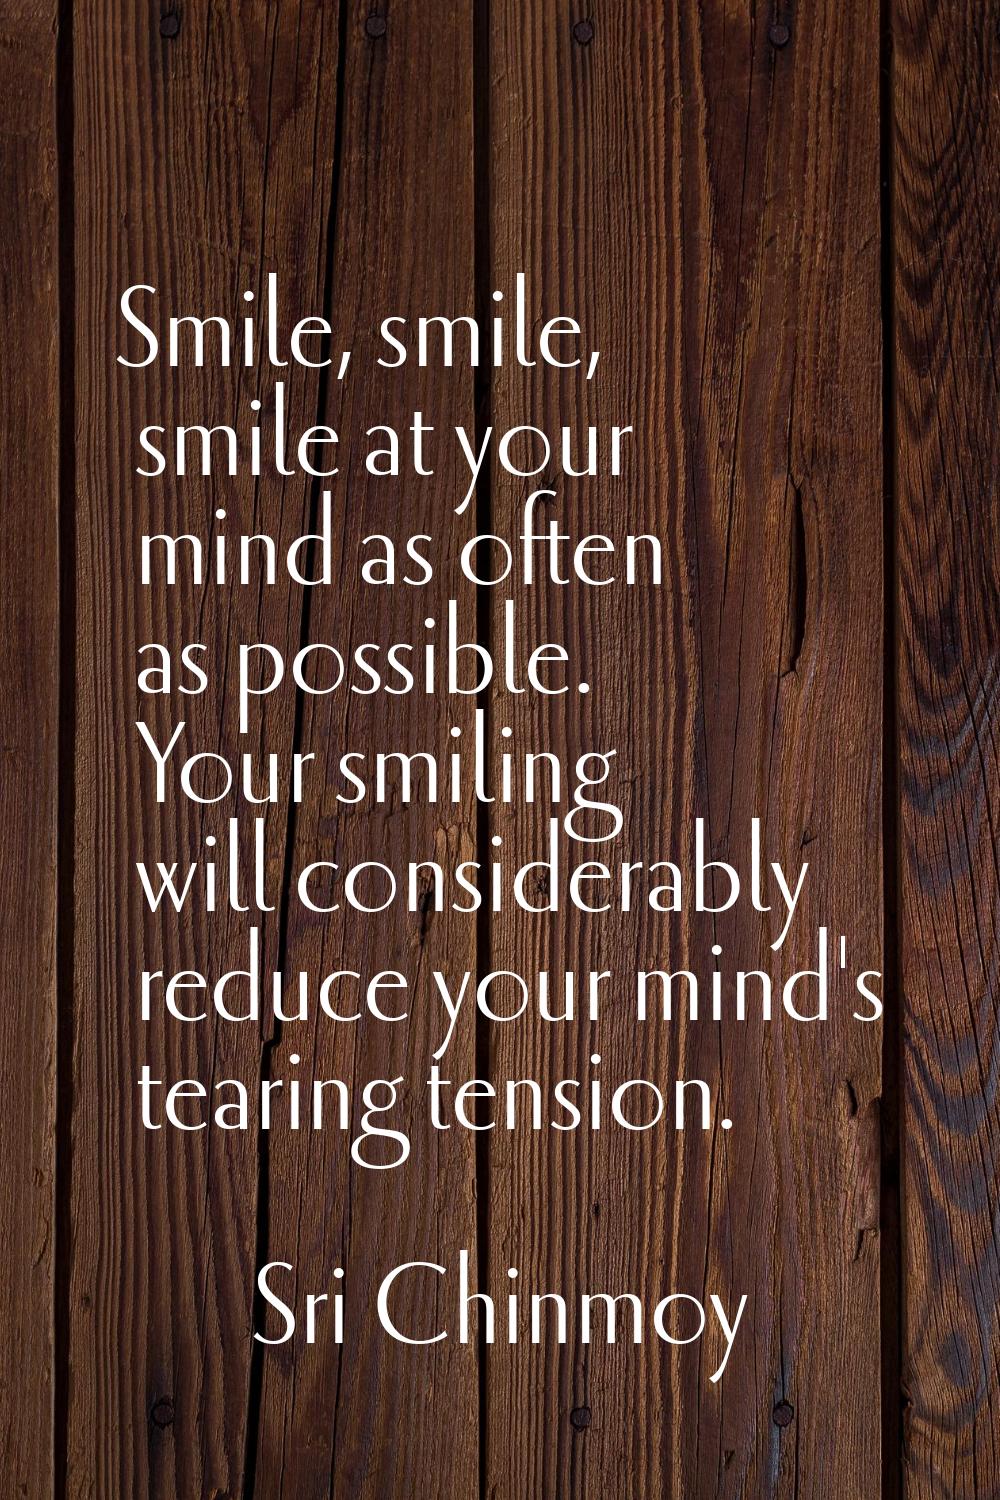 Smile, smile, smile at your mind as often as possible. Your smiling will considerably reduce your m